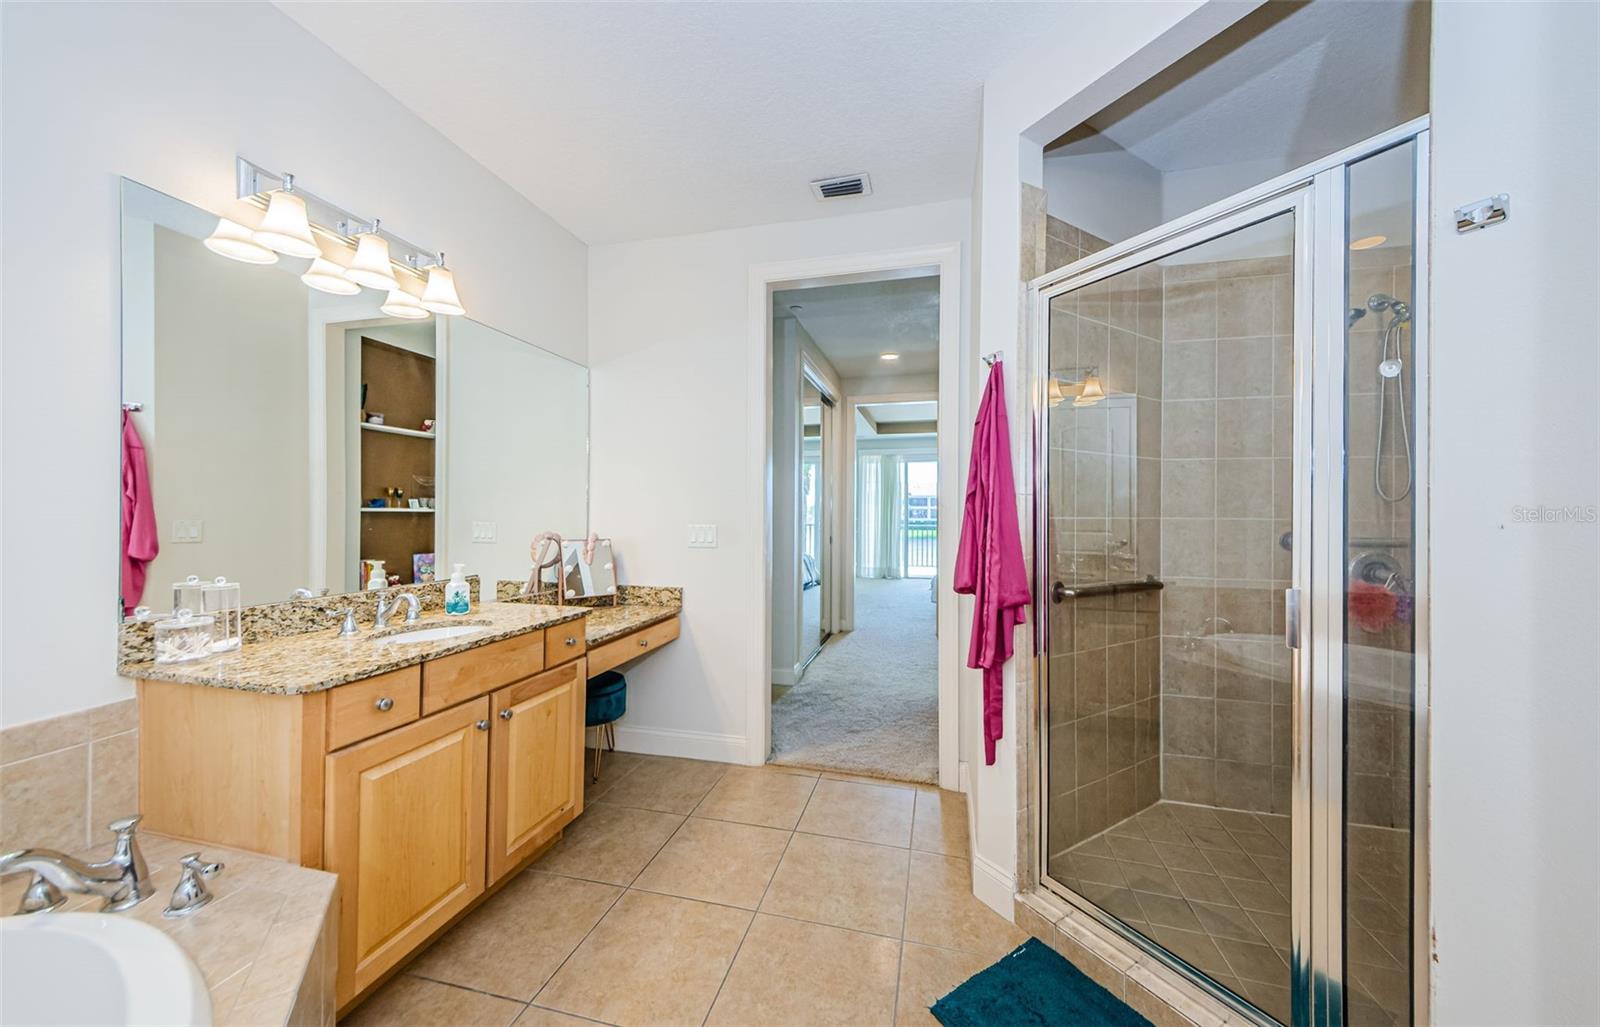 Primary Bathroom has Soaking Tub and Separate Walk In Shower